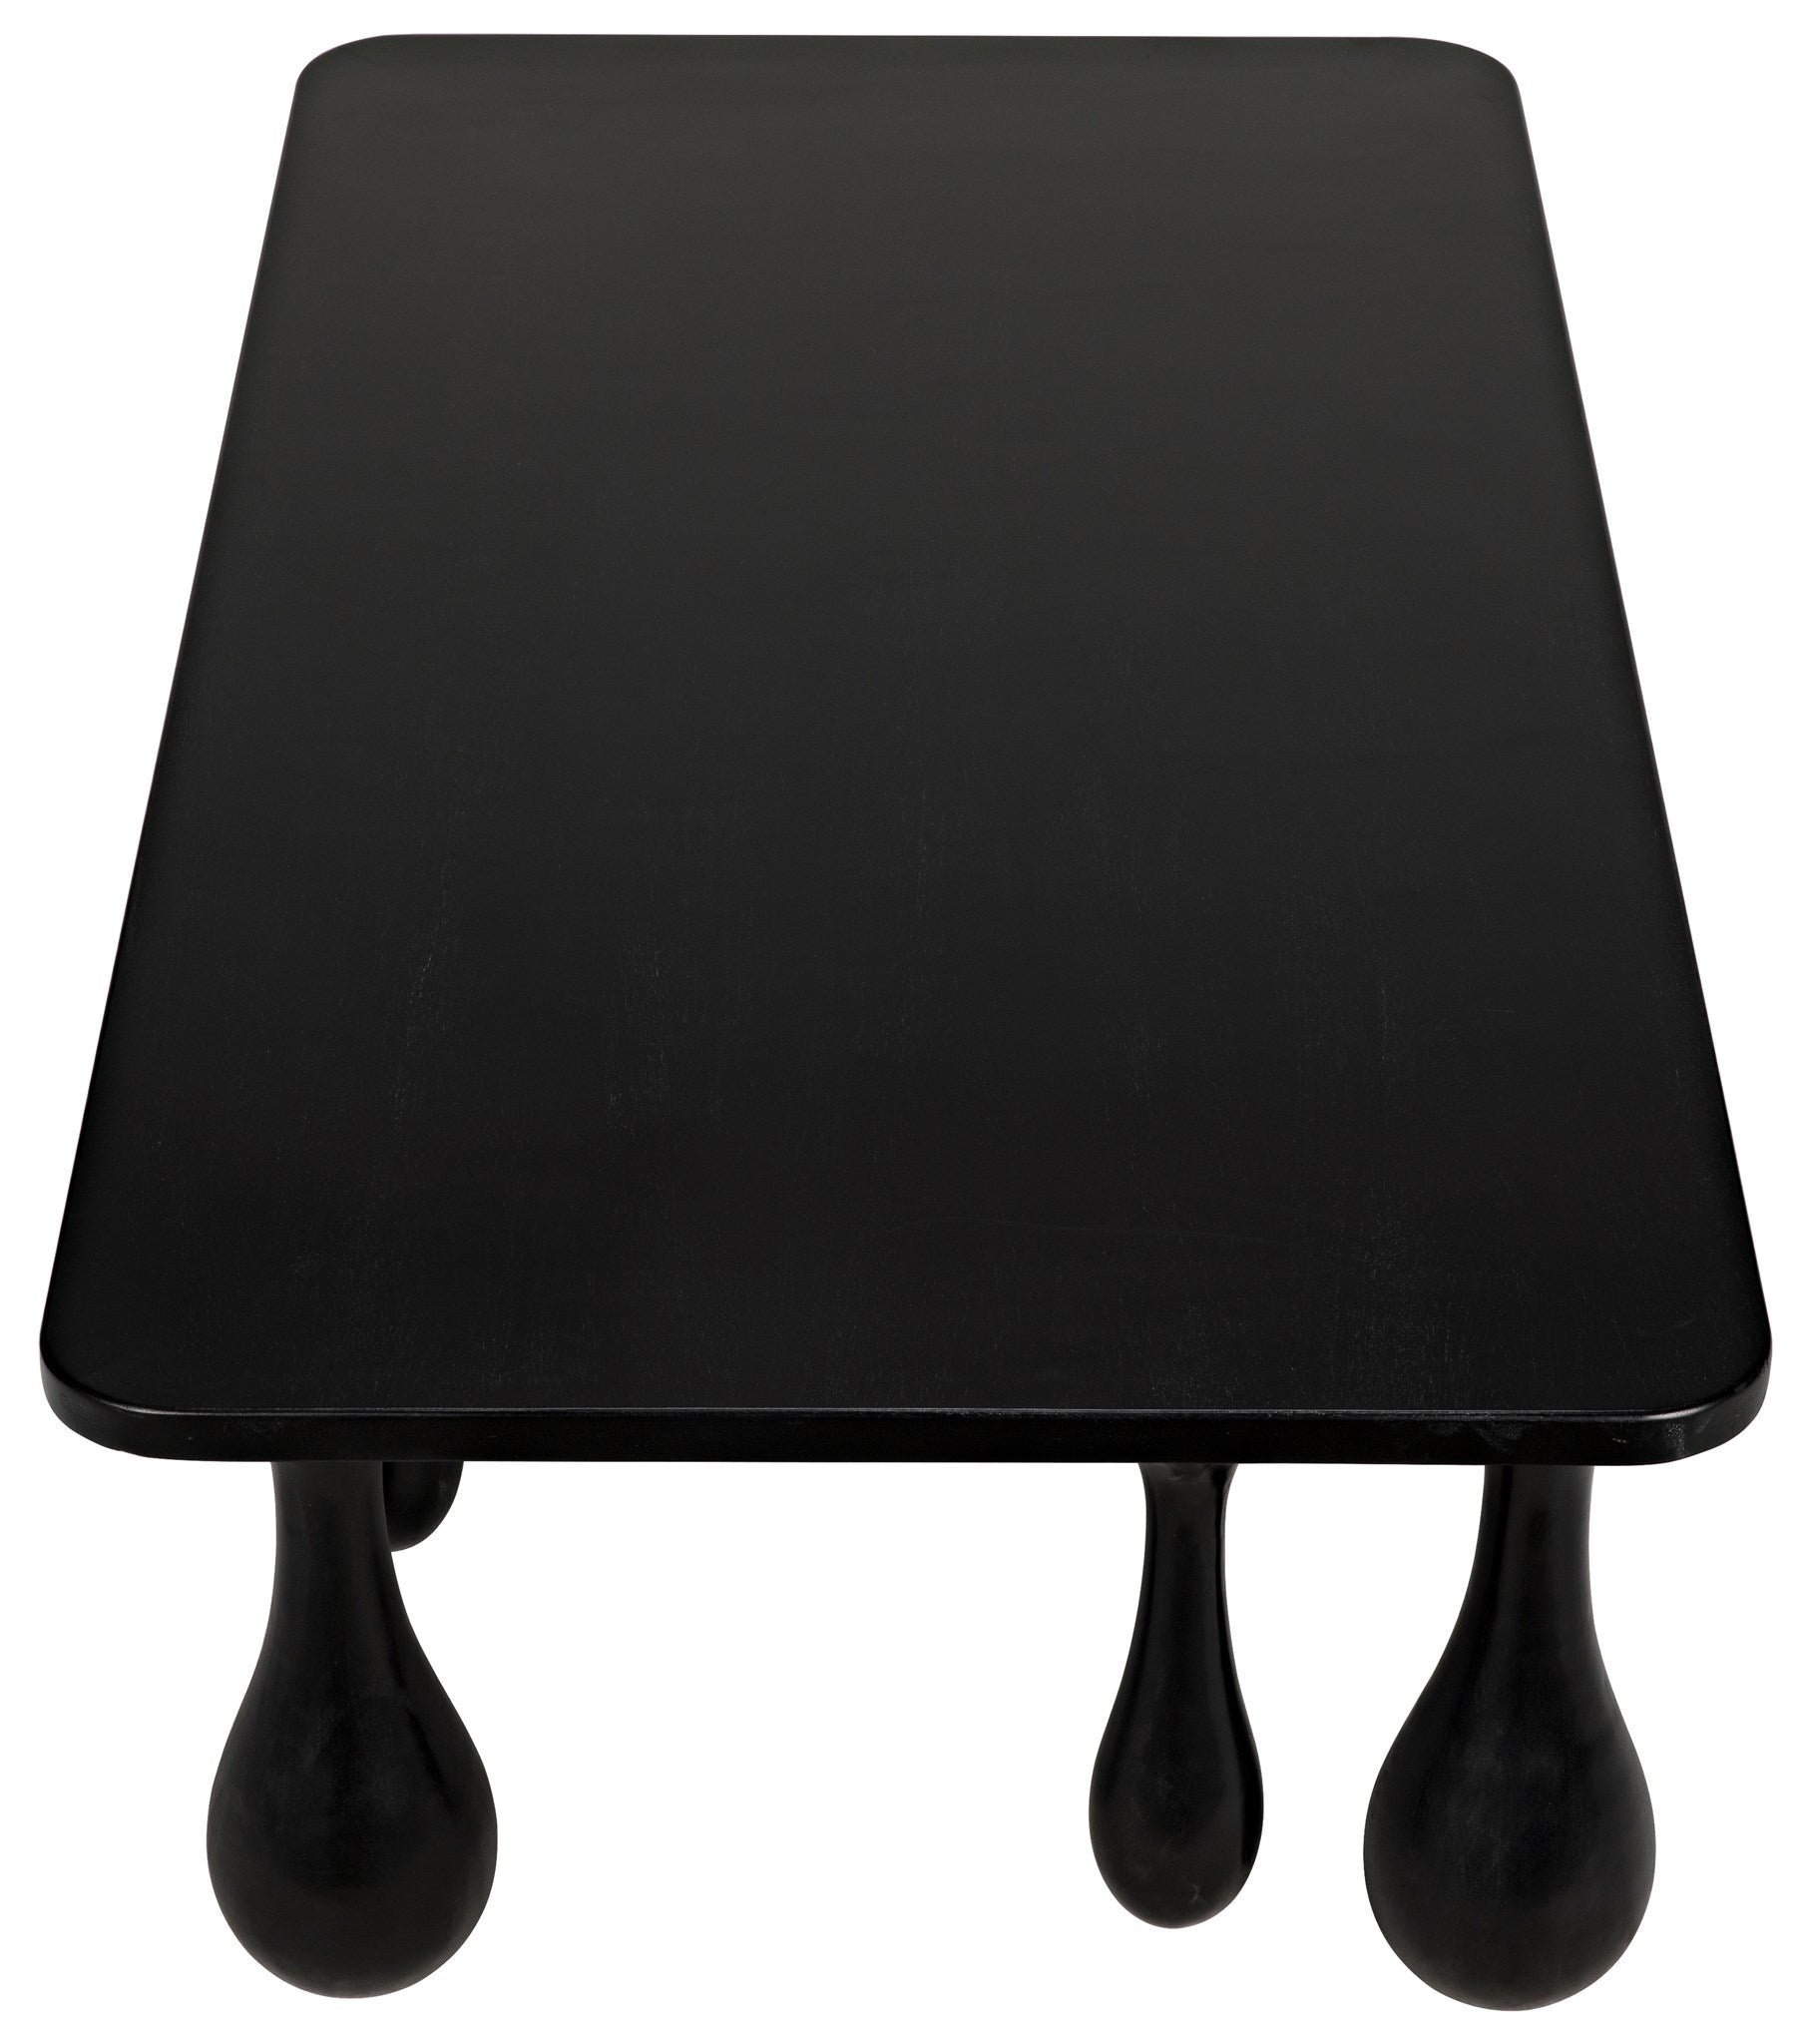 Drop Cocktail Table, Hand Rubbed Black - Furniture - Tipplergoods